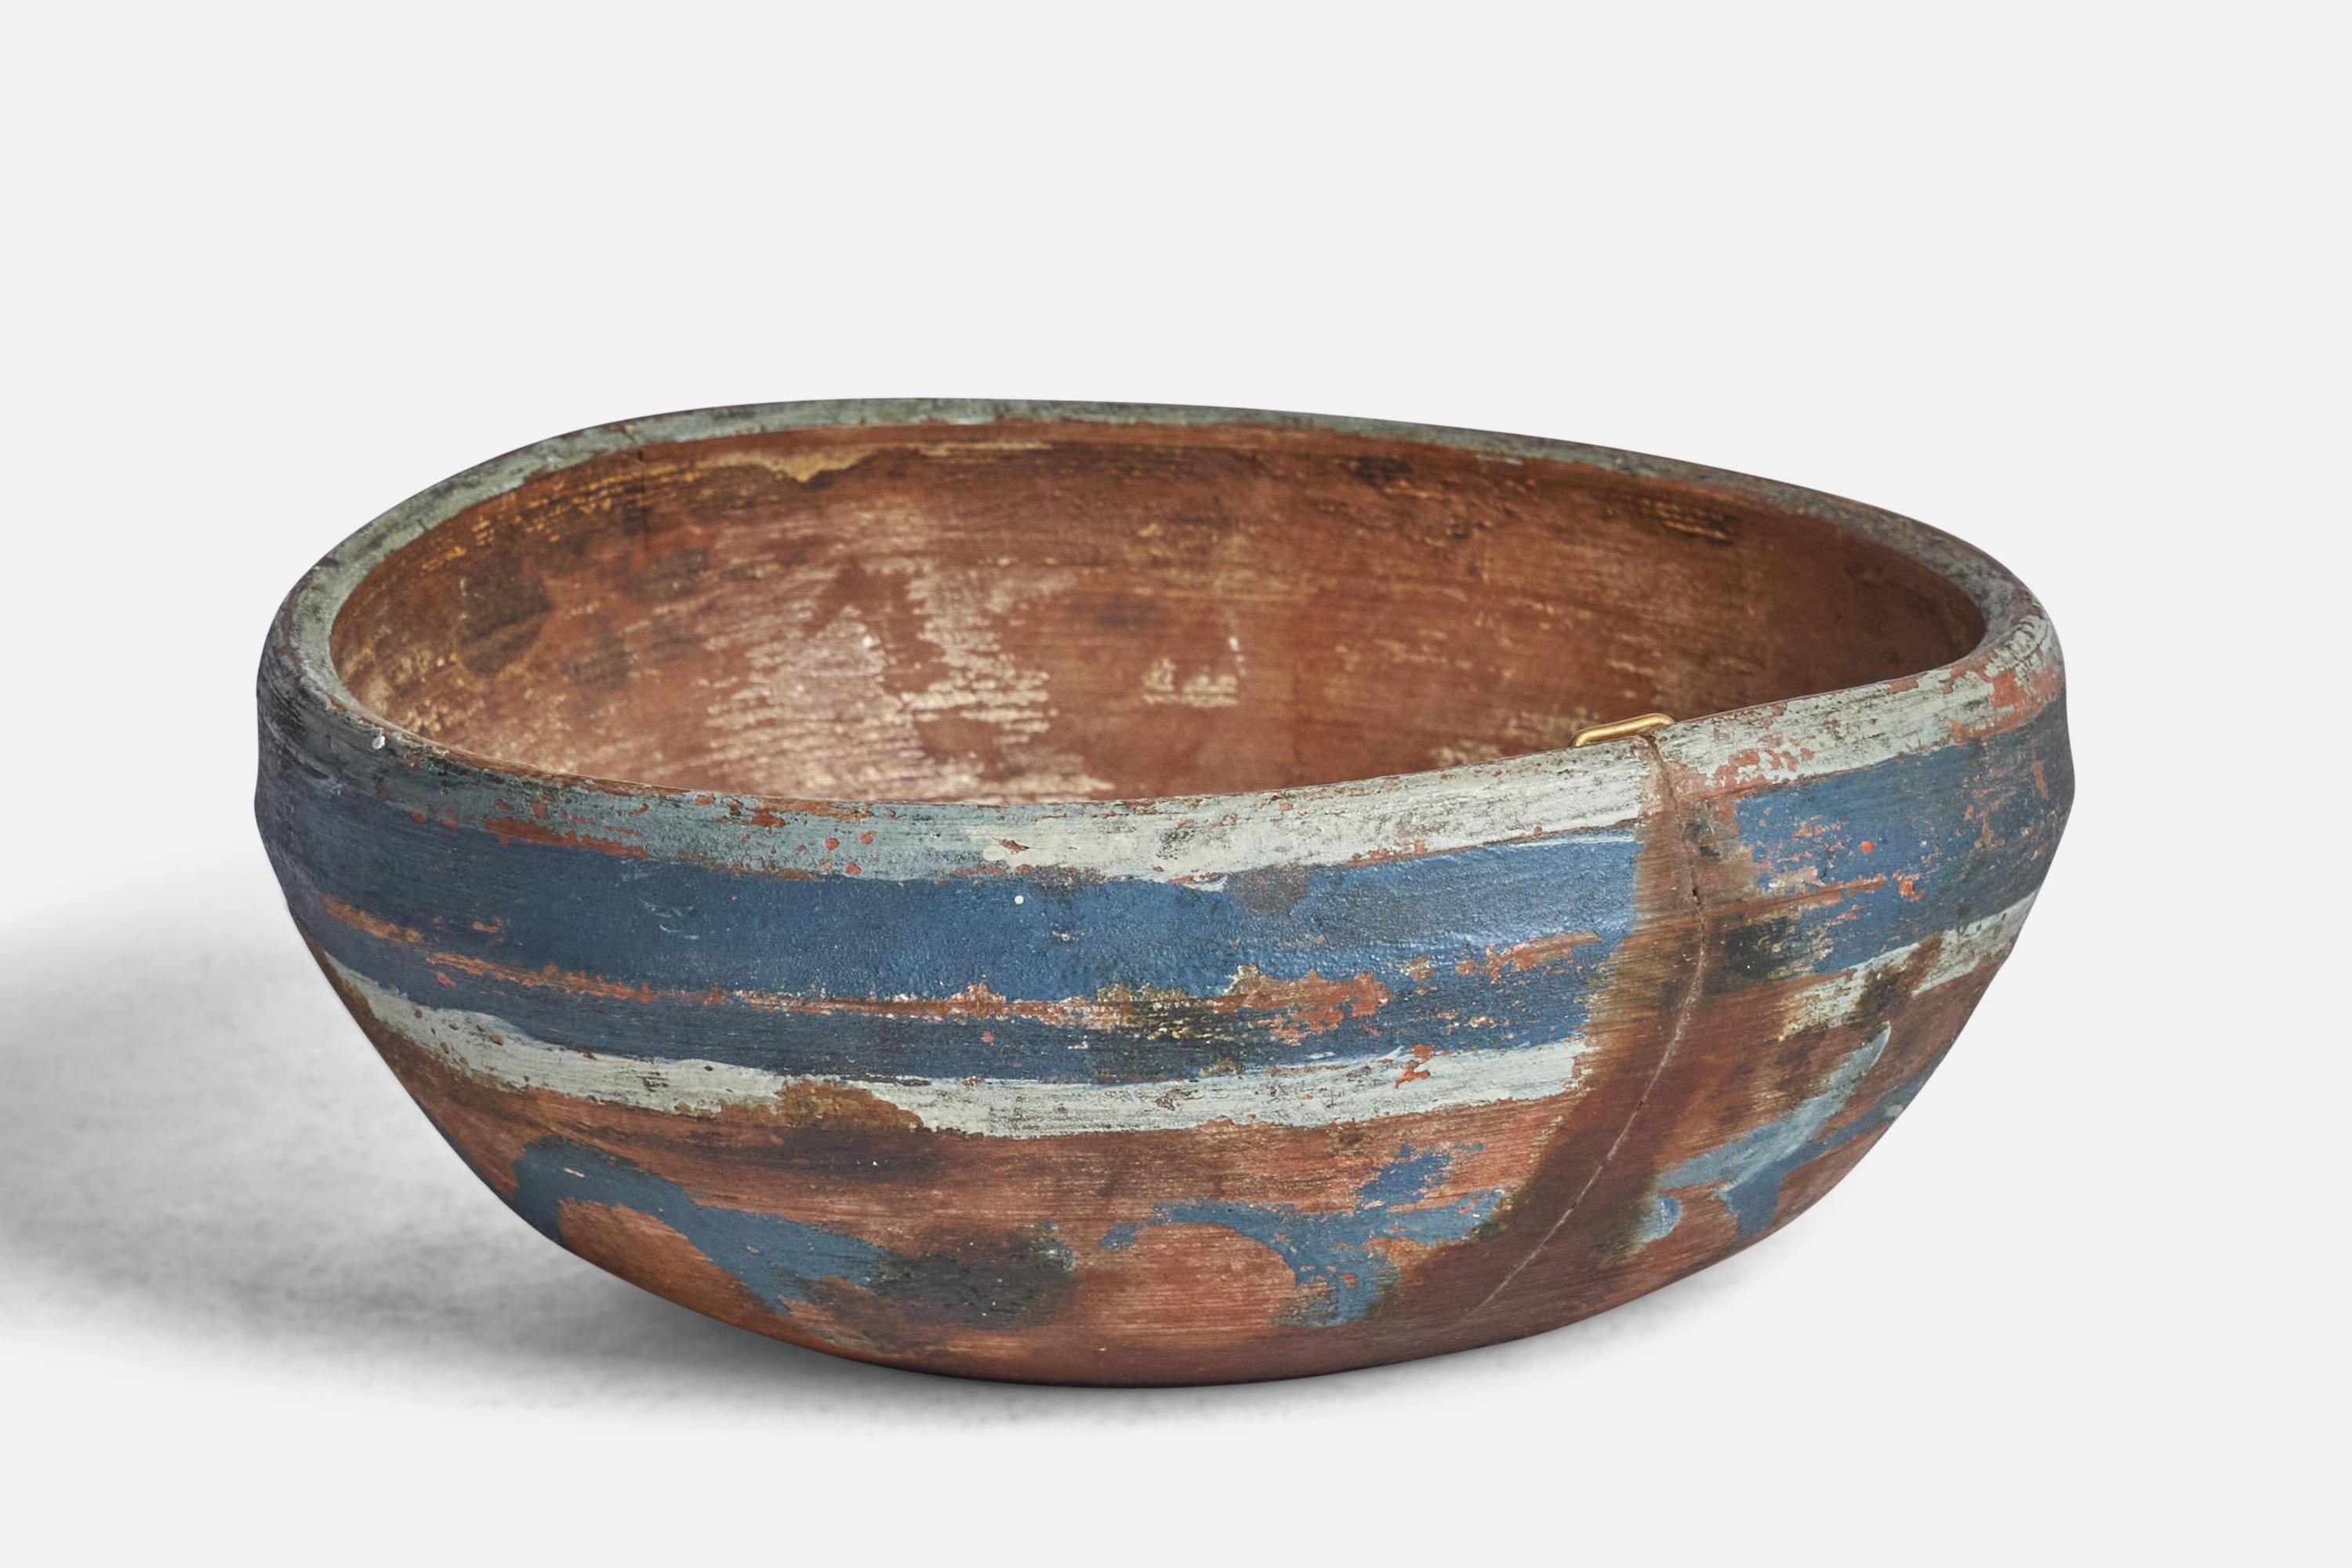 A small blue and white-painted wooden bowl designed and produced in Sweden, 19th century.